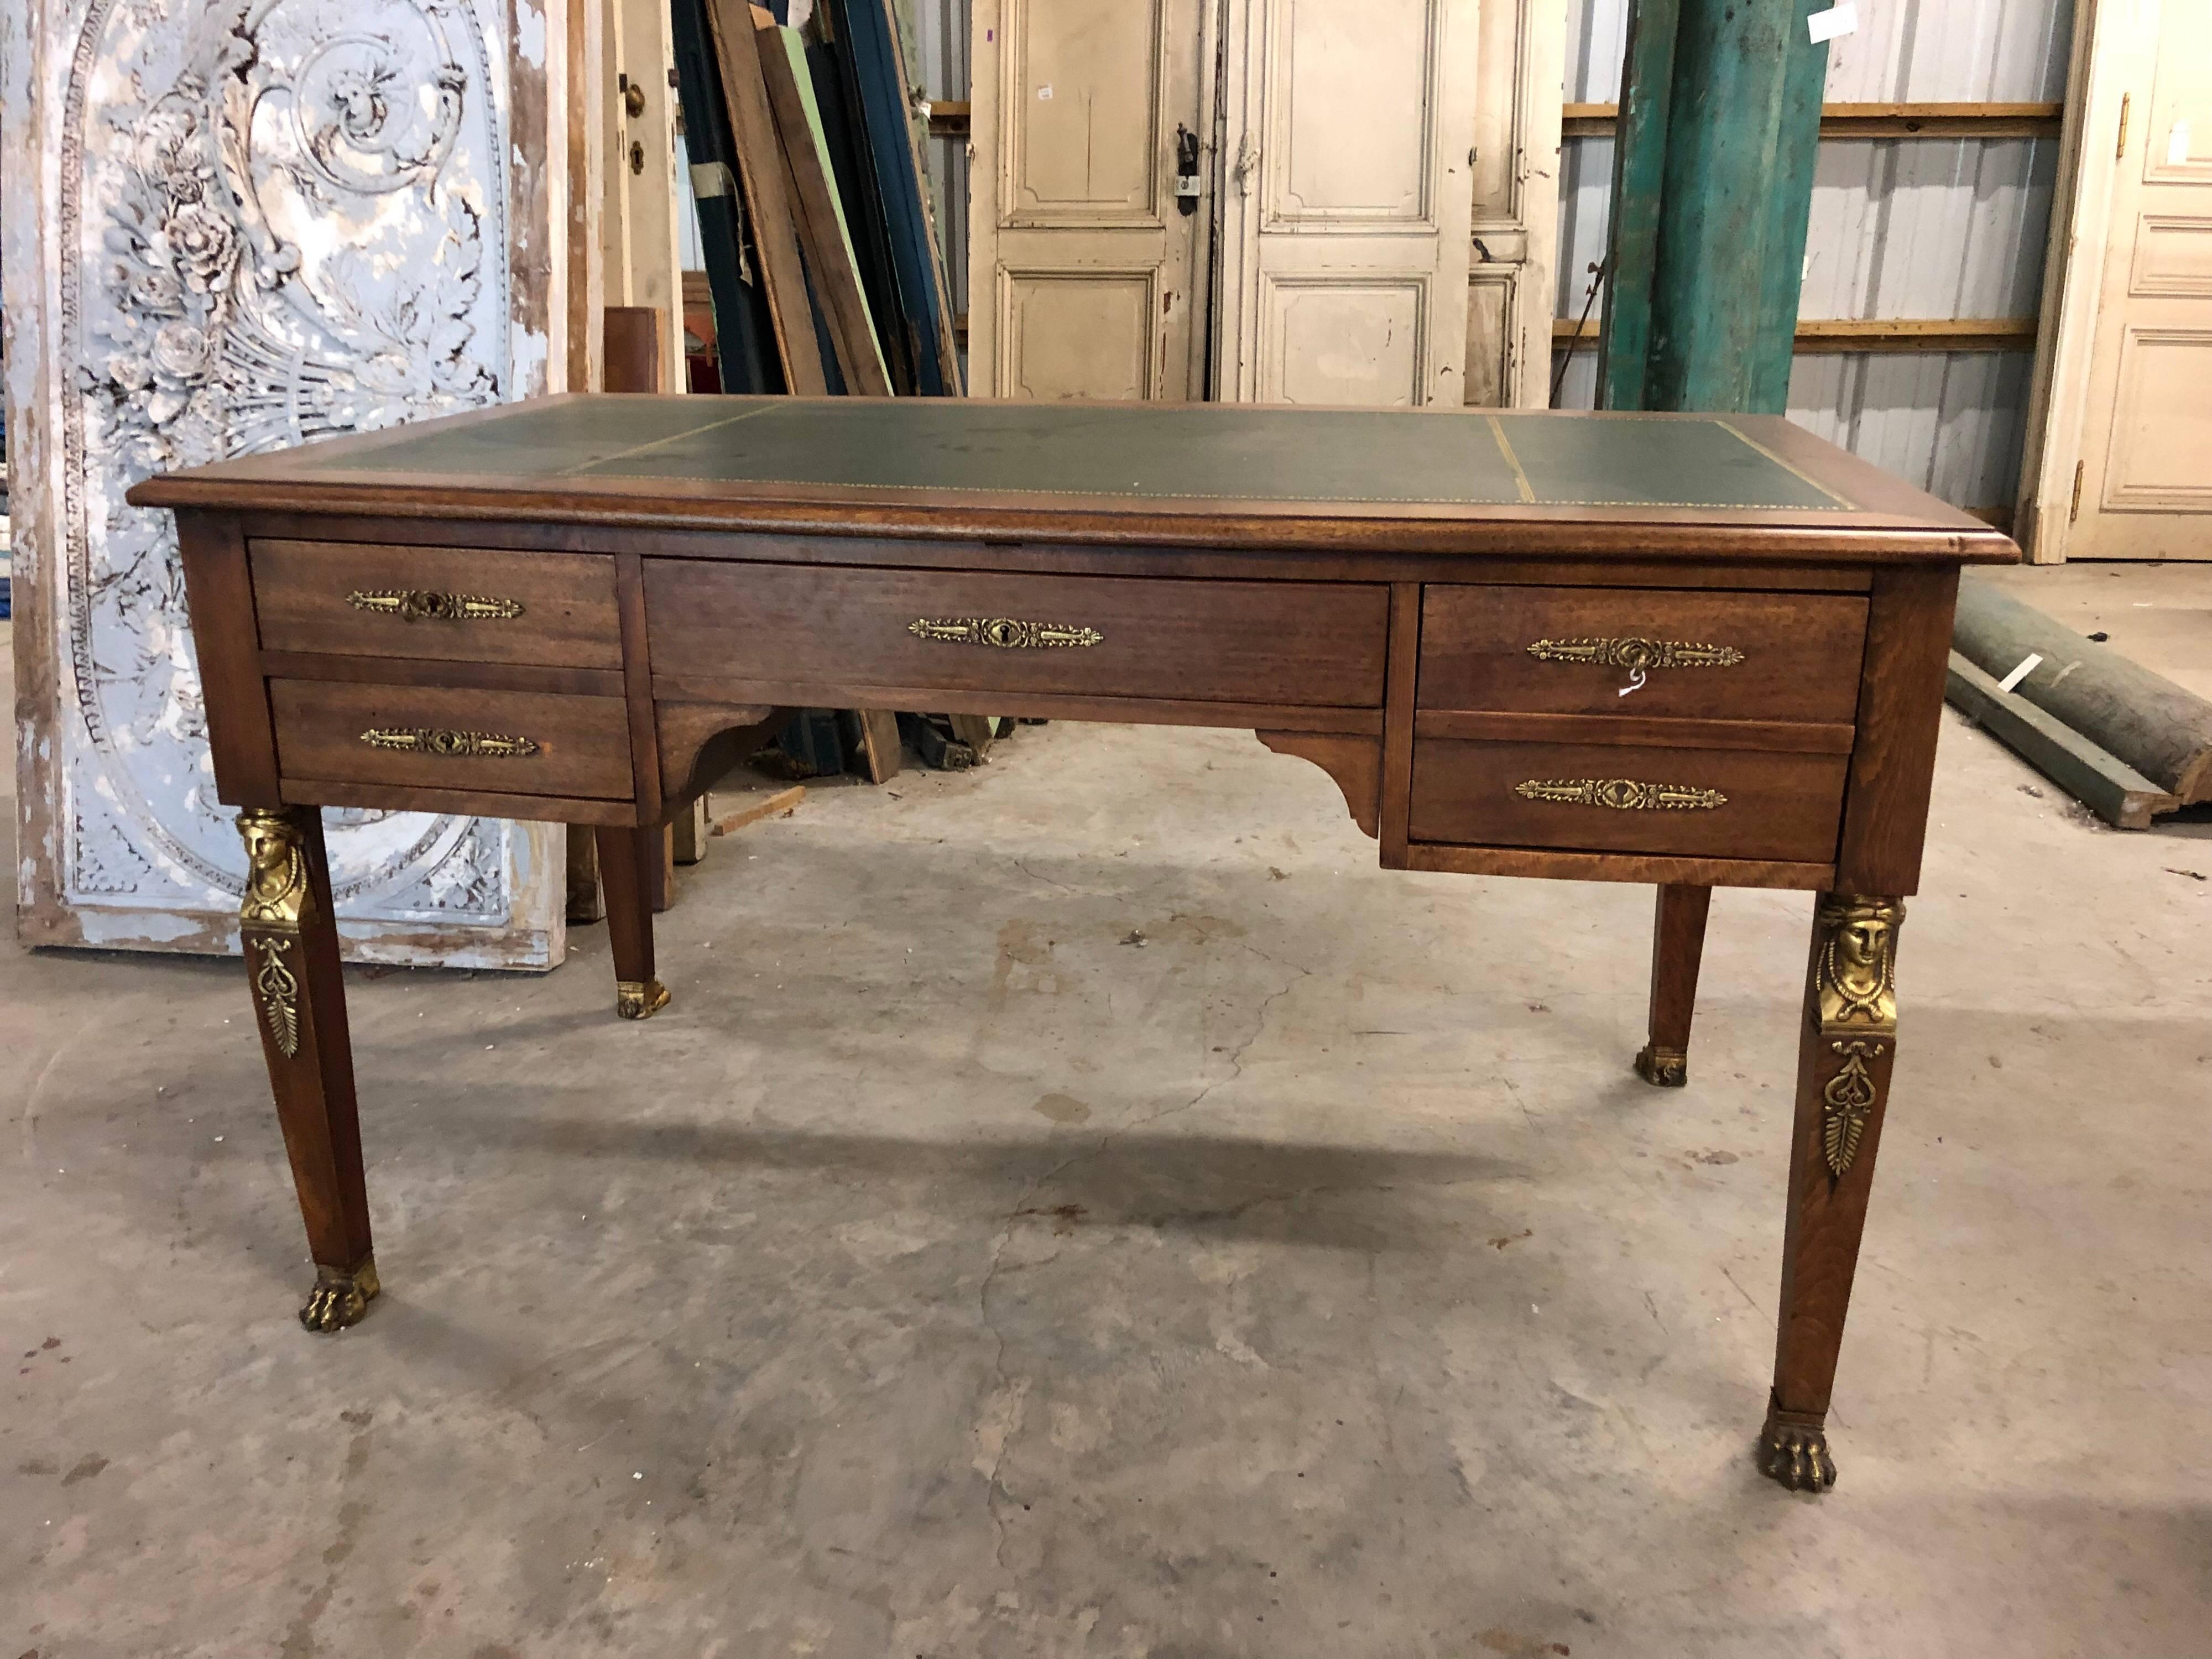 20th Century French Mahogany Leather Top Neoclassical Desk or Bureau Plat